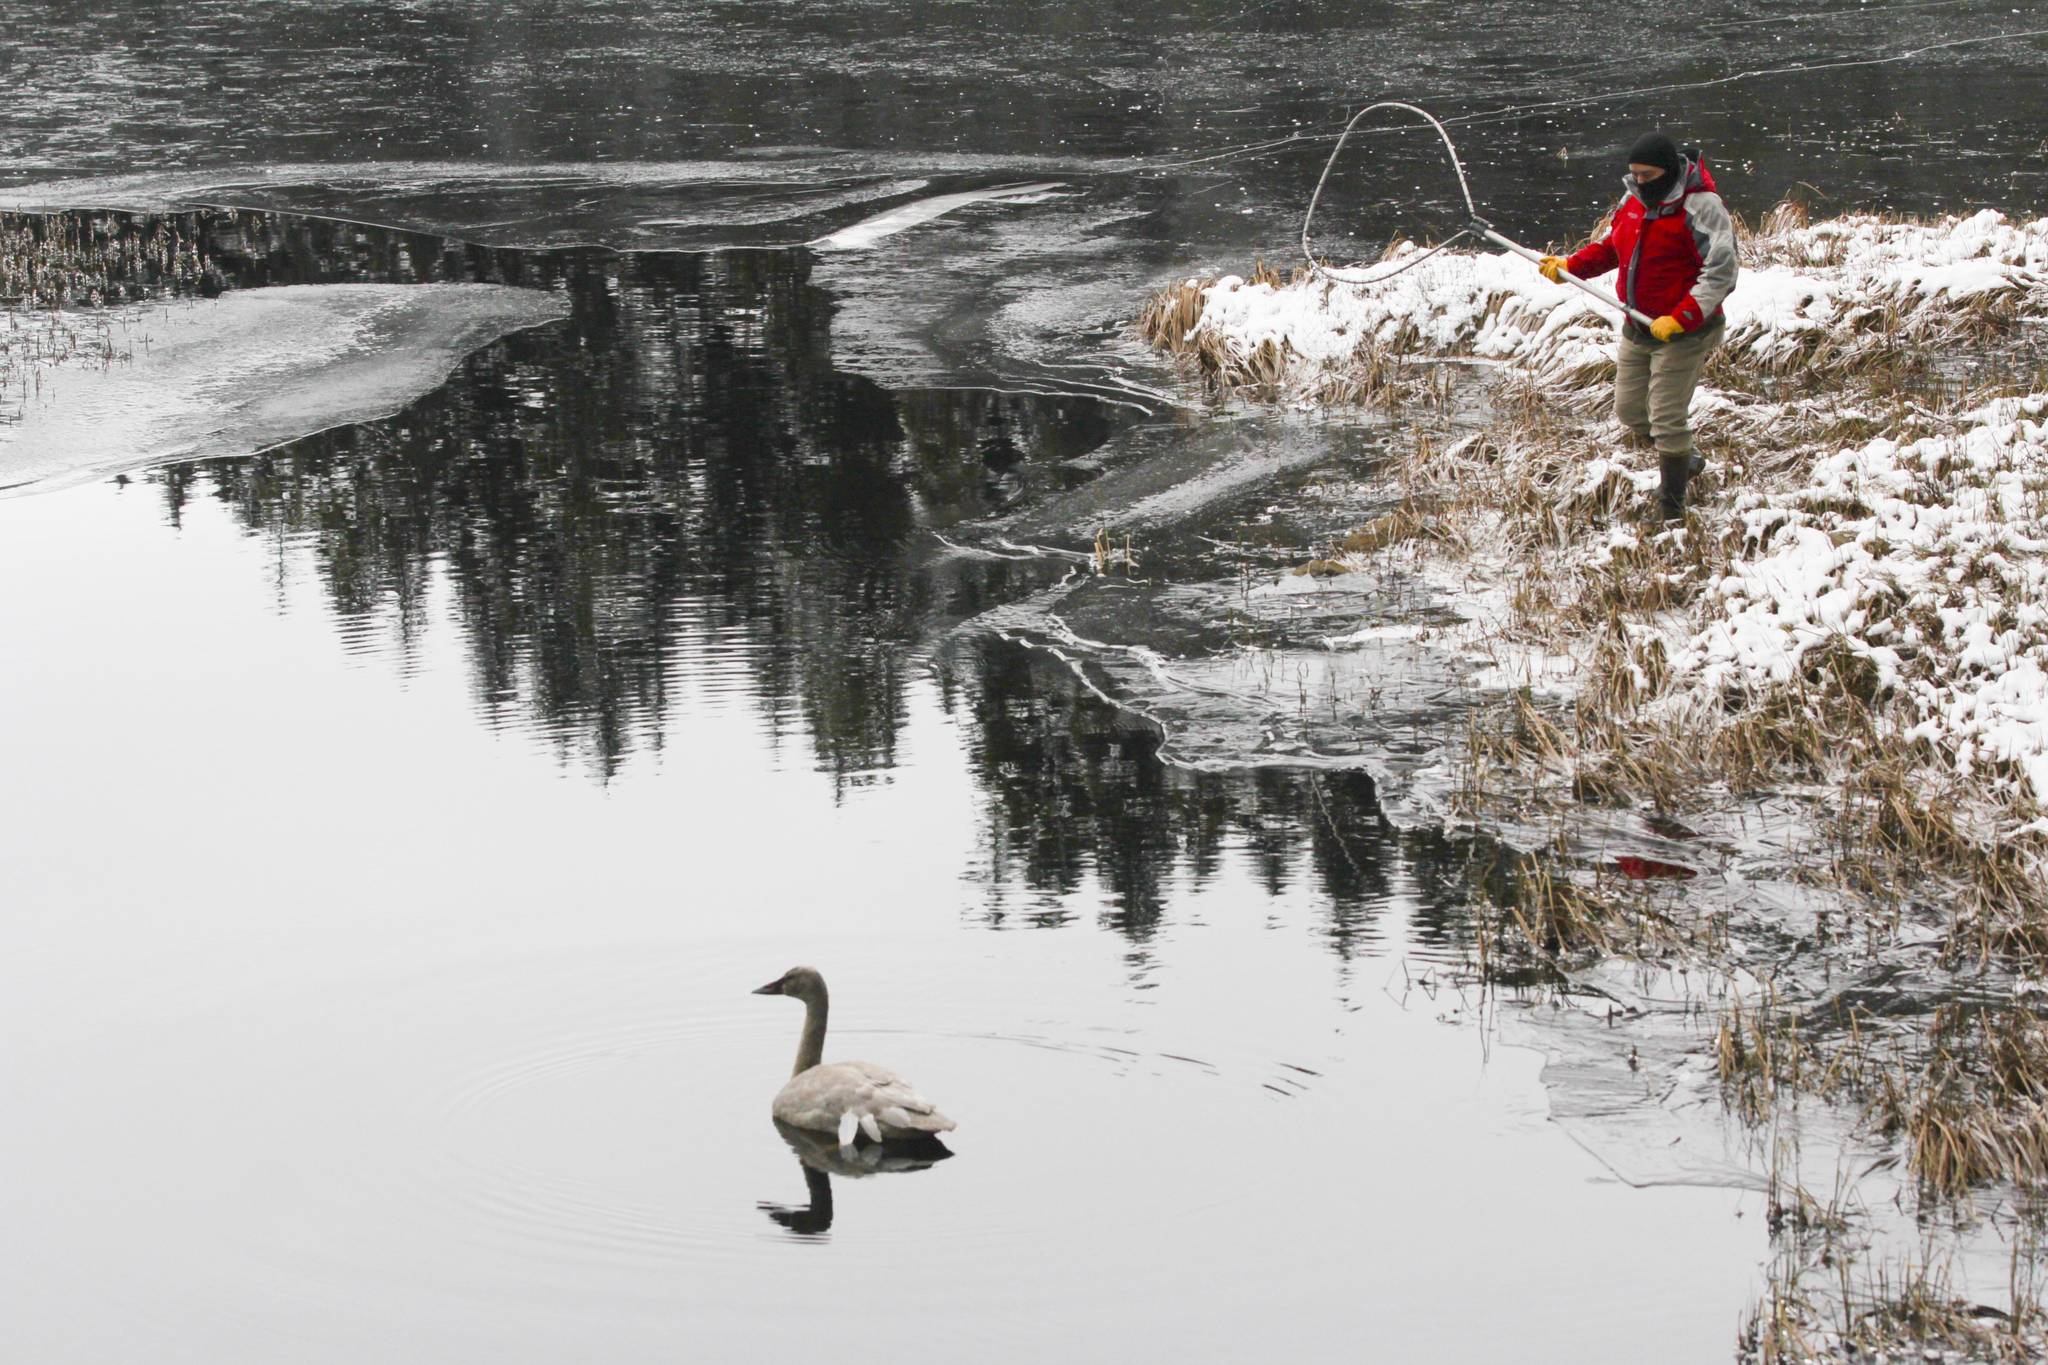 Tim Benner assists the Juneau Raptor Center as volunteers attempted to capture a trumpeter swan with an injured wing at Auke Lake on Jan. 28, 2021. (Michael S. Lockett / Juneau Empire)